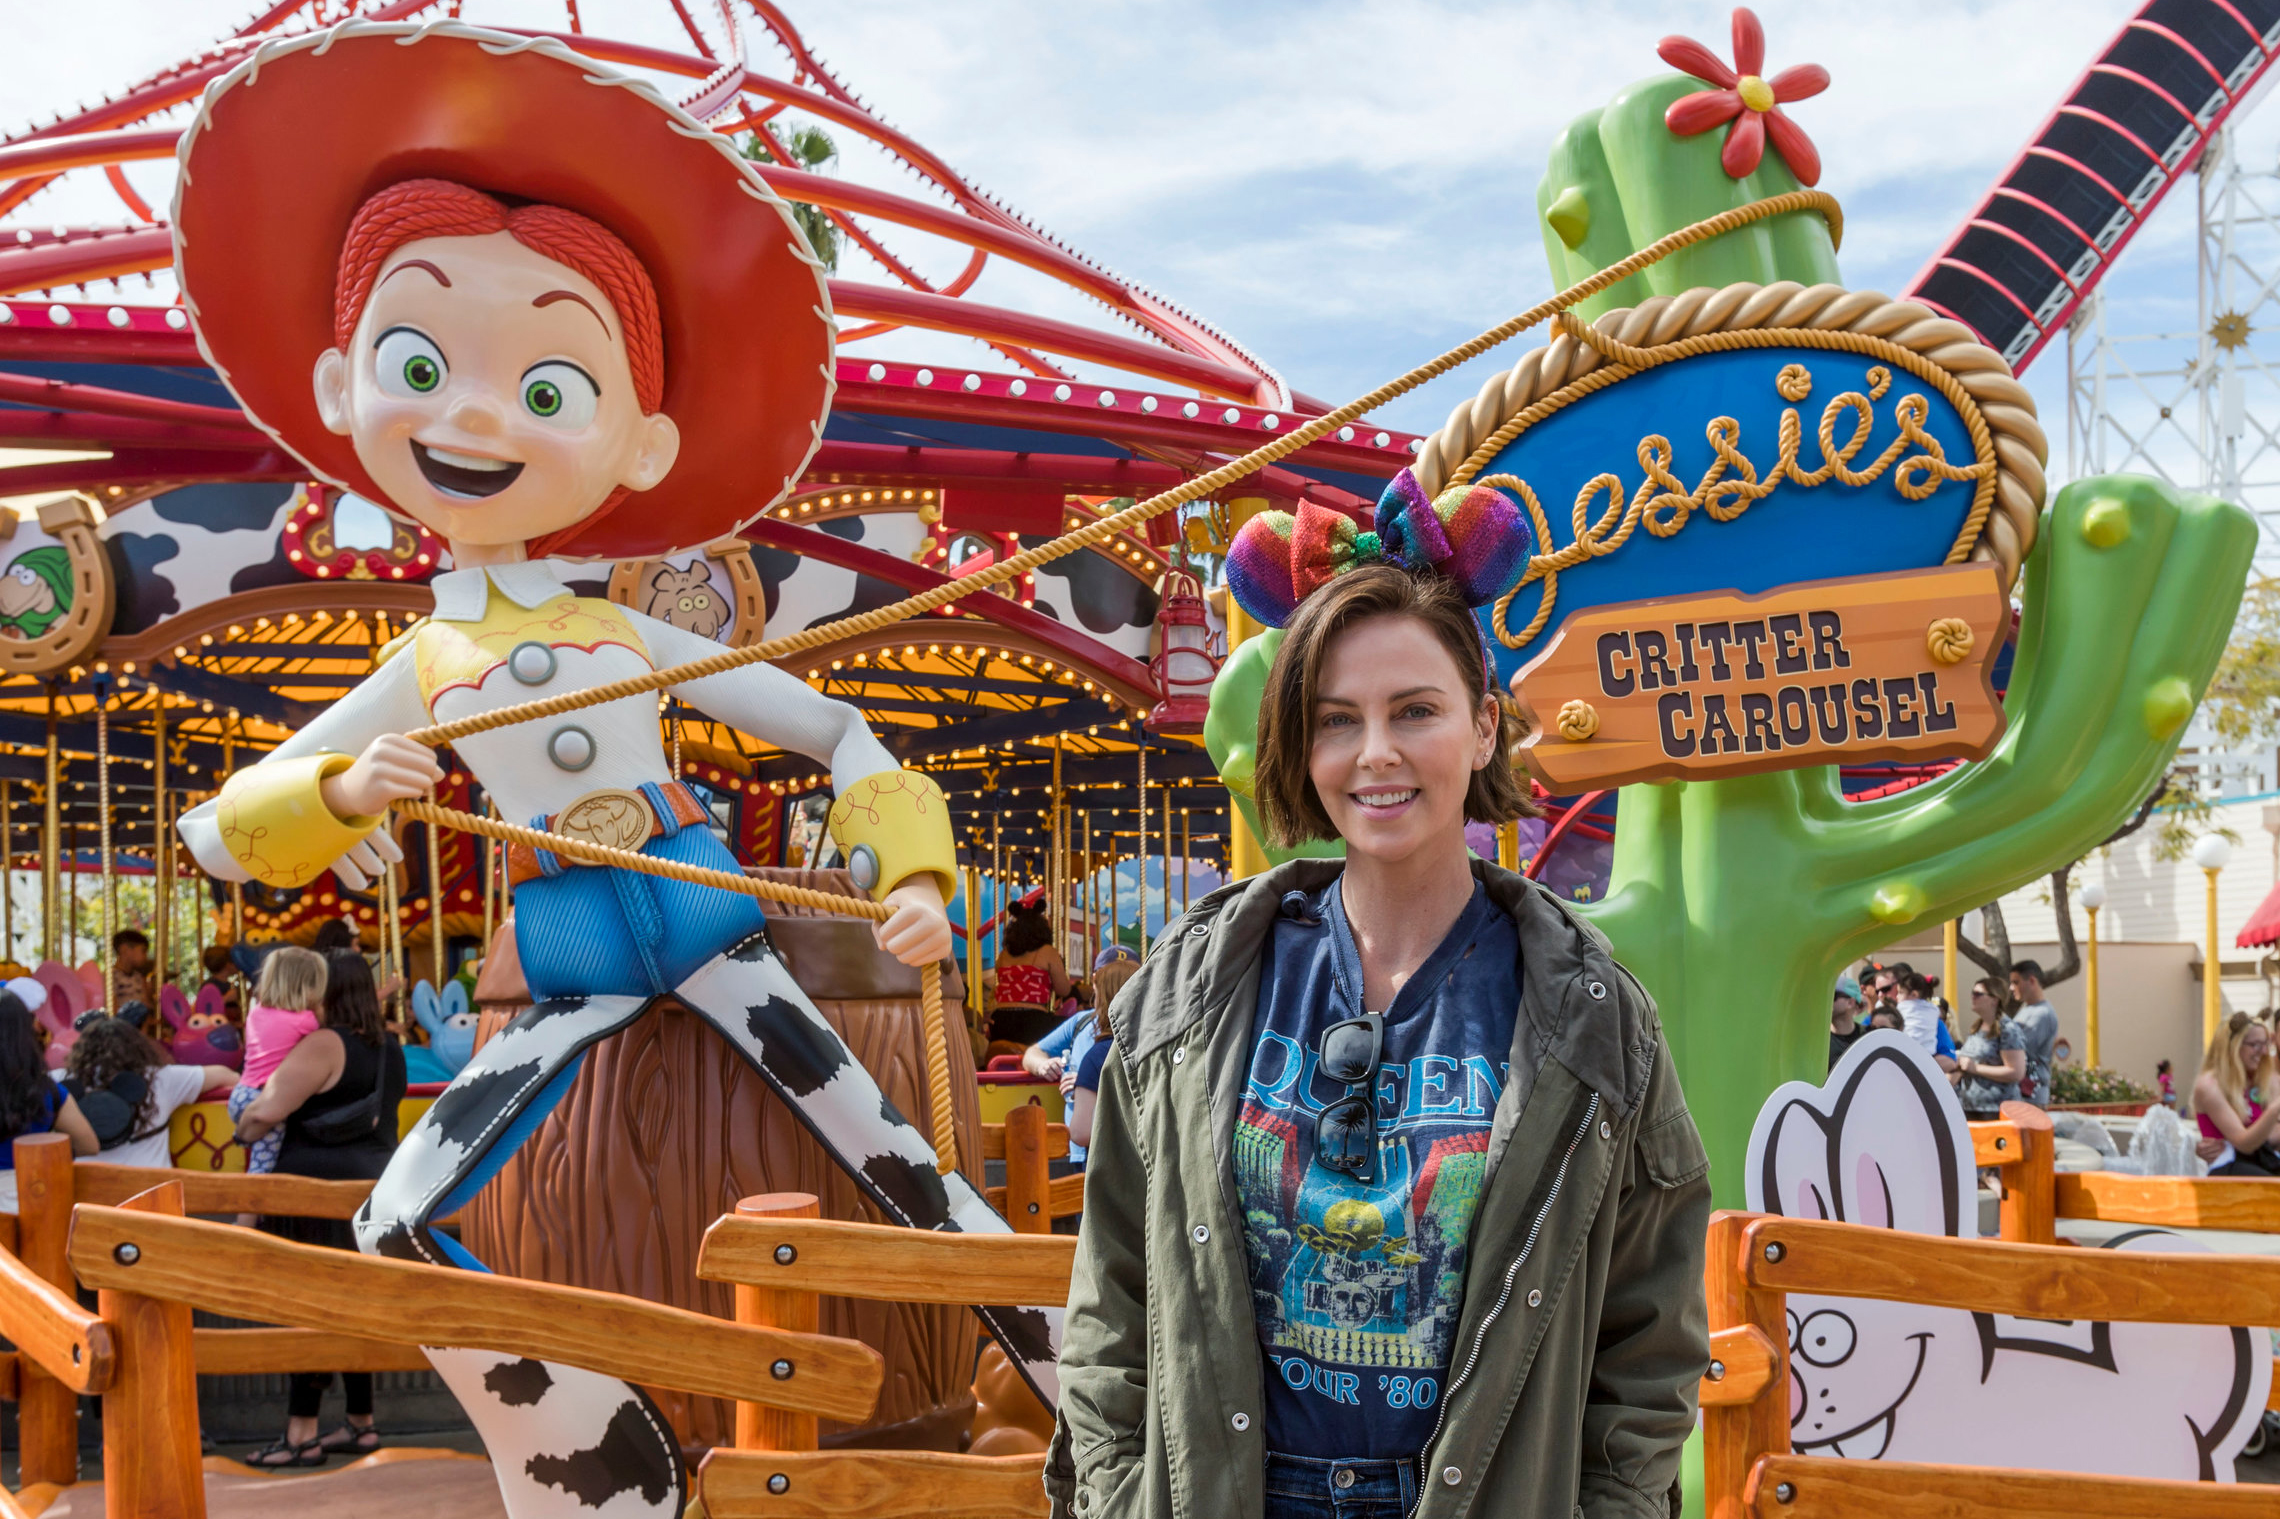 Charlize Theron Visit’s the New Jessie’s Critter Carousel at Disney California Adventure